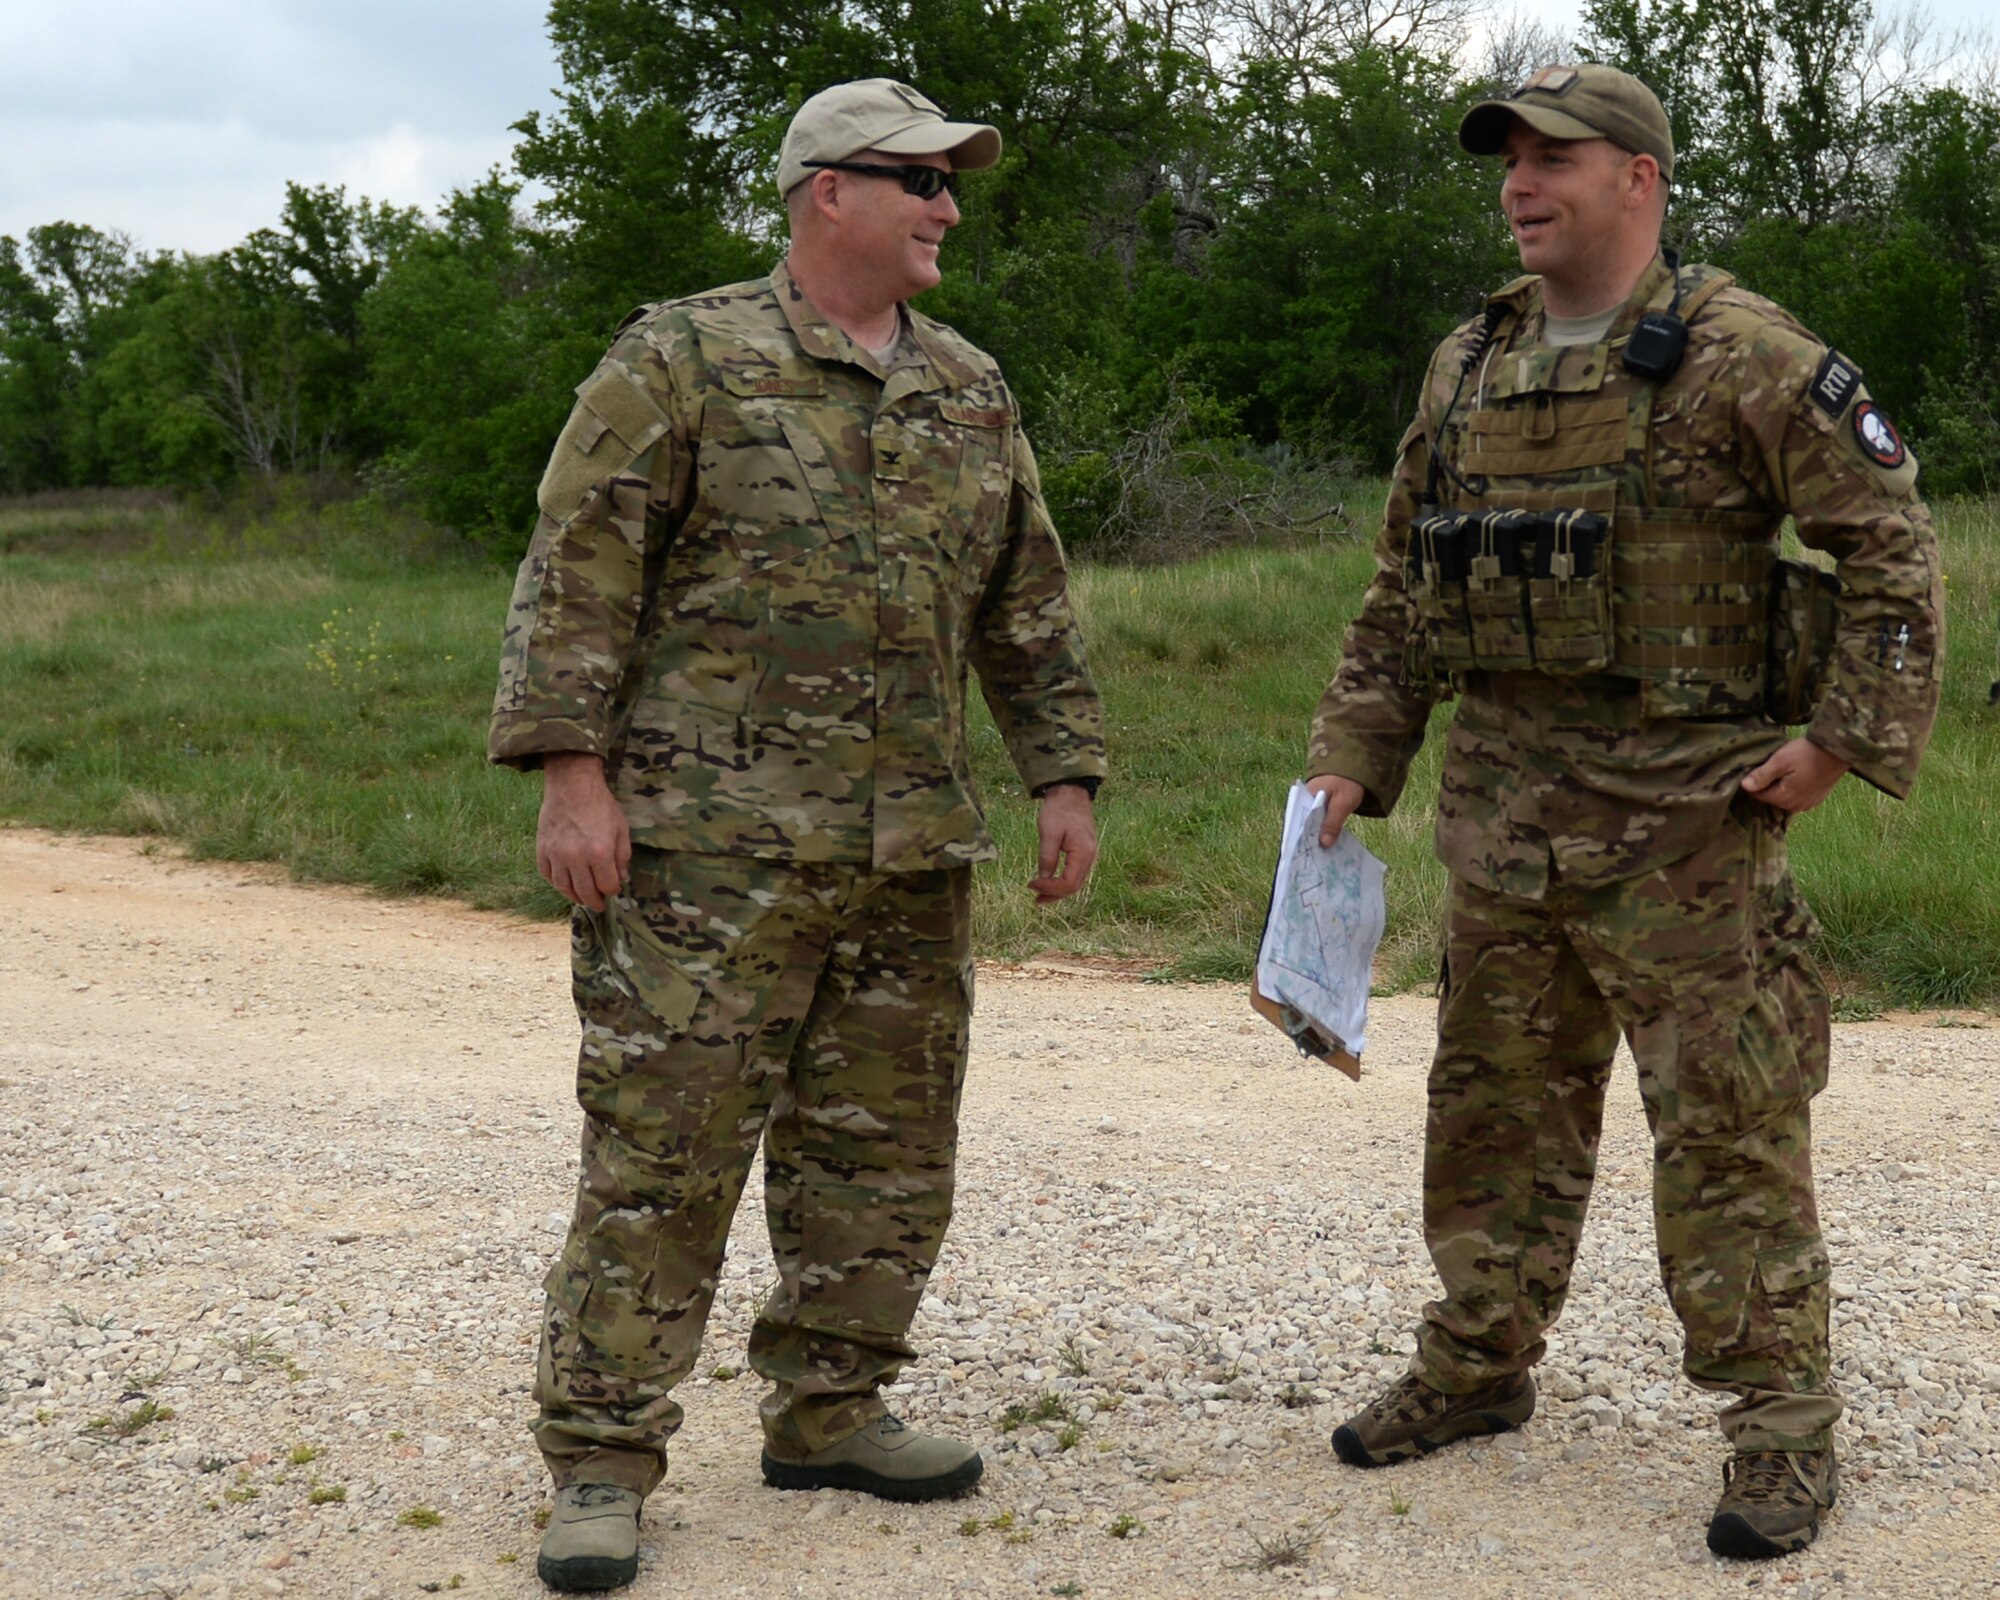 Col. Stan Jones, 147th Operations Group commander, 147th Reconnaissance Wing, based at Ellington Field Joint Reserve Base in Houston, Texas, speaks with a vehicle maintenance non-commissioned officer with the 147th Air Support Operations Squadron during a field training exercise April 3, 2014, at Camp Swift in Bastrop, Texas. The support personnel participated in the annual exercise to test the requirements necessitated by being members of an ASOS unit.